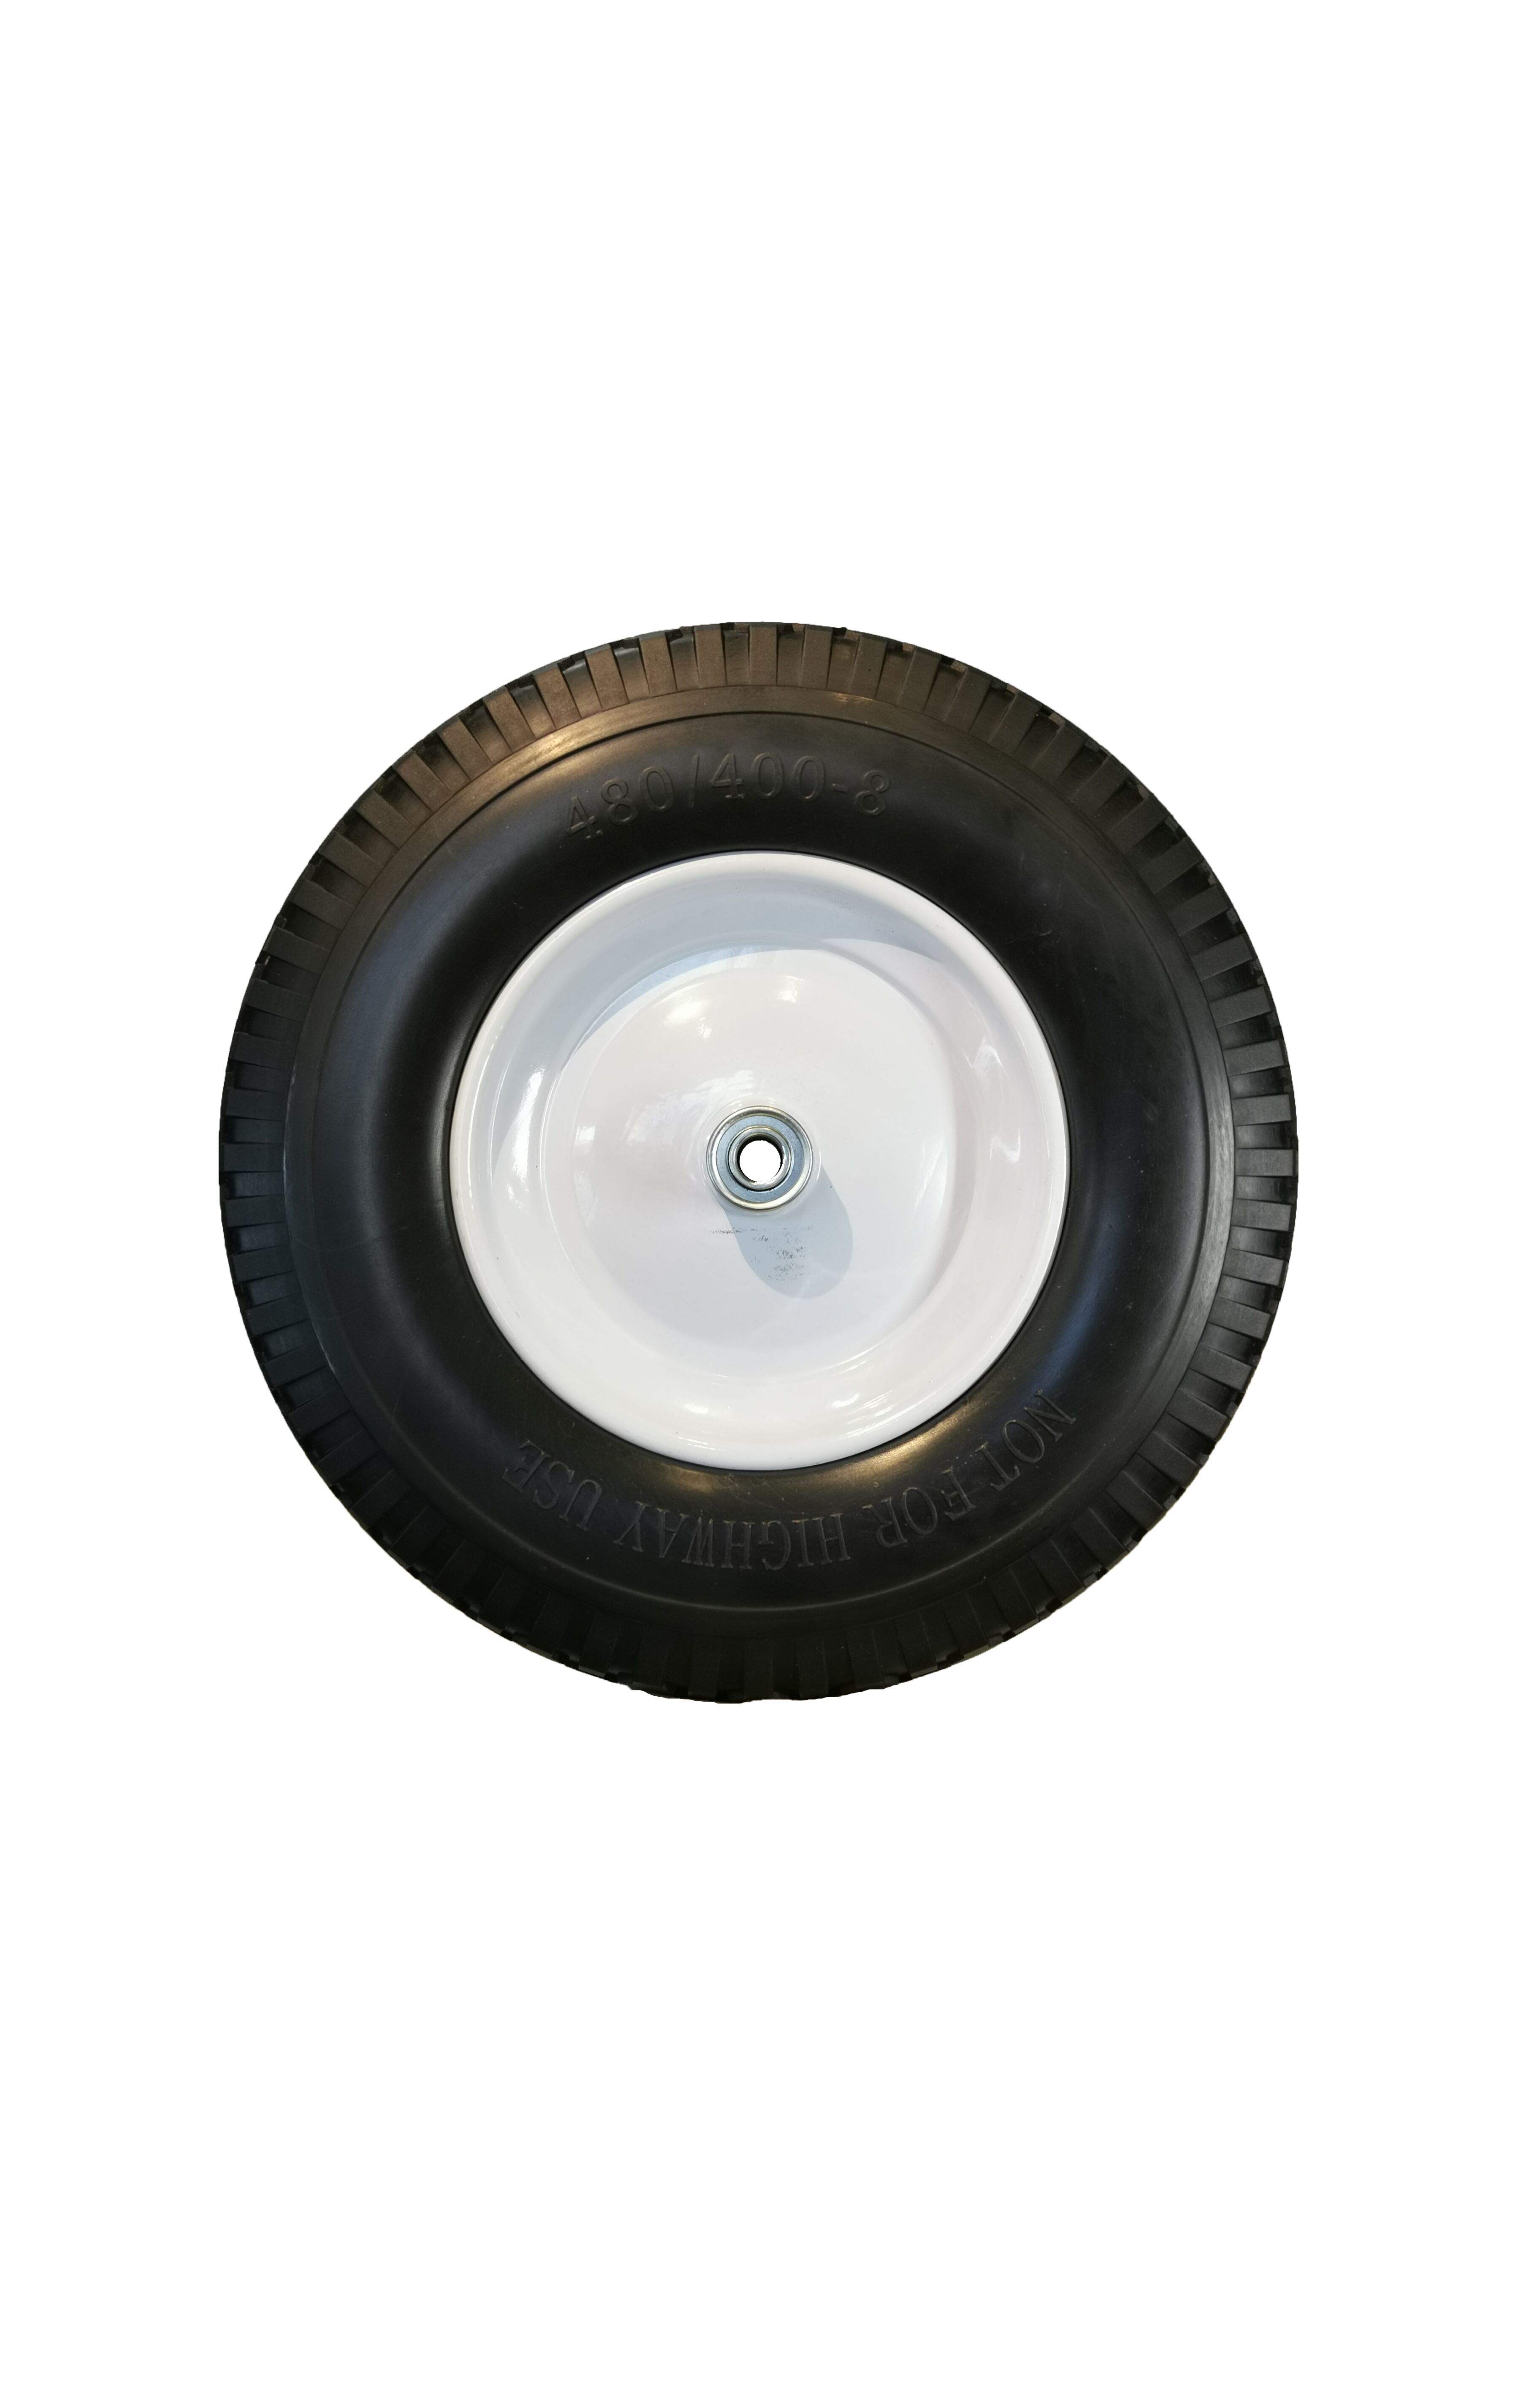 N7 Two Ribbed 4.80/4.00-8 Flat Free Wheelbarrow/Cart Universal 16 Tires w/Steel Rim Packed in Carton 5/8 & 3/4 Bore T157 